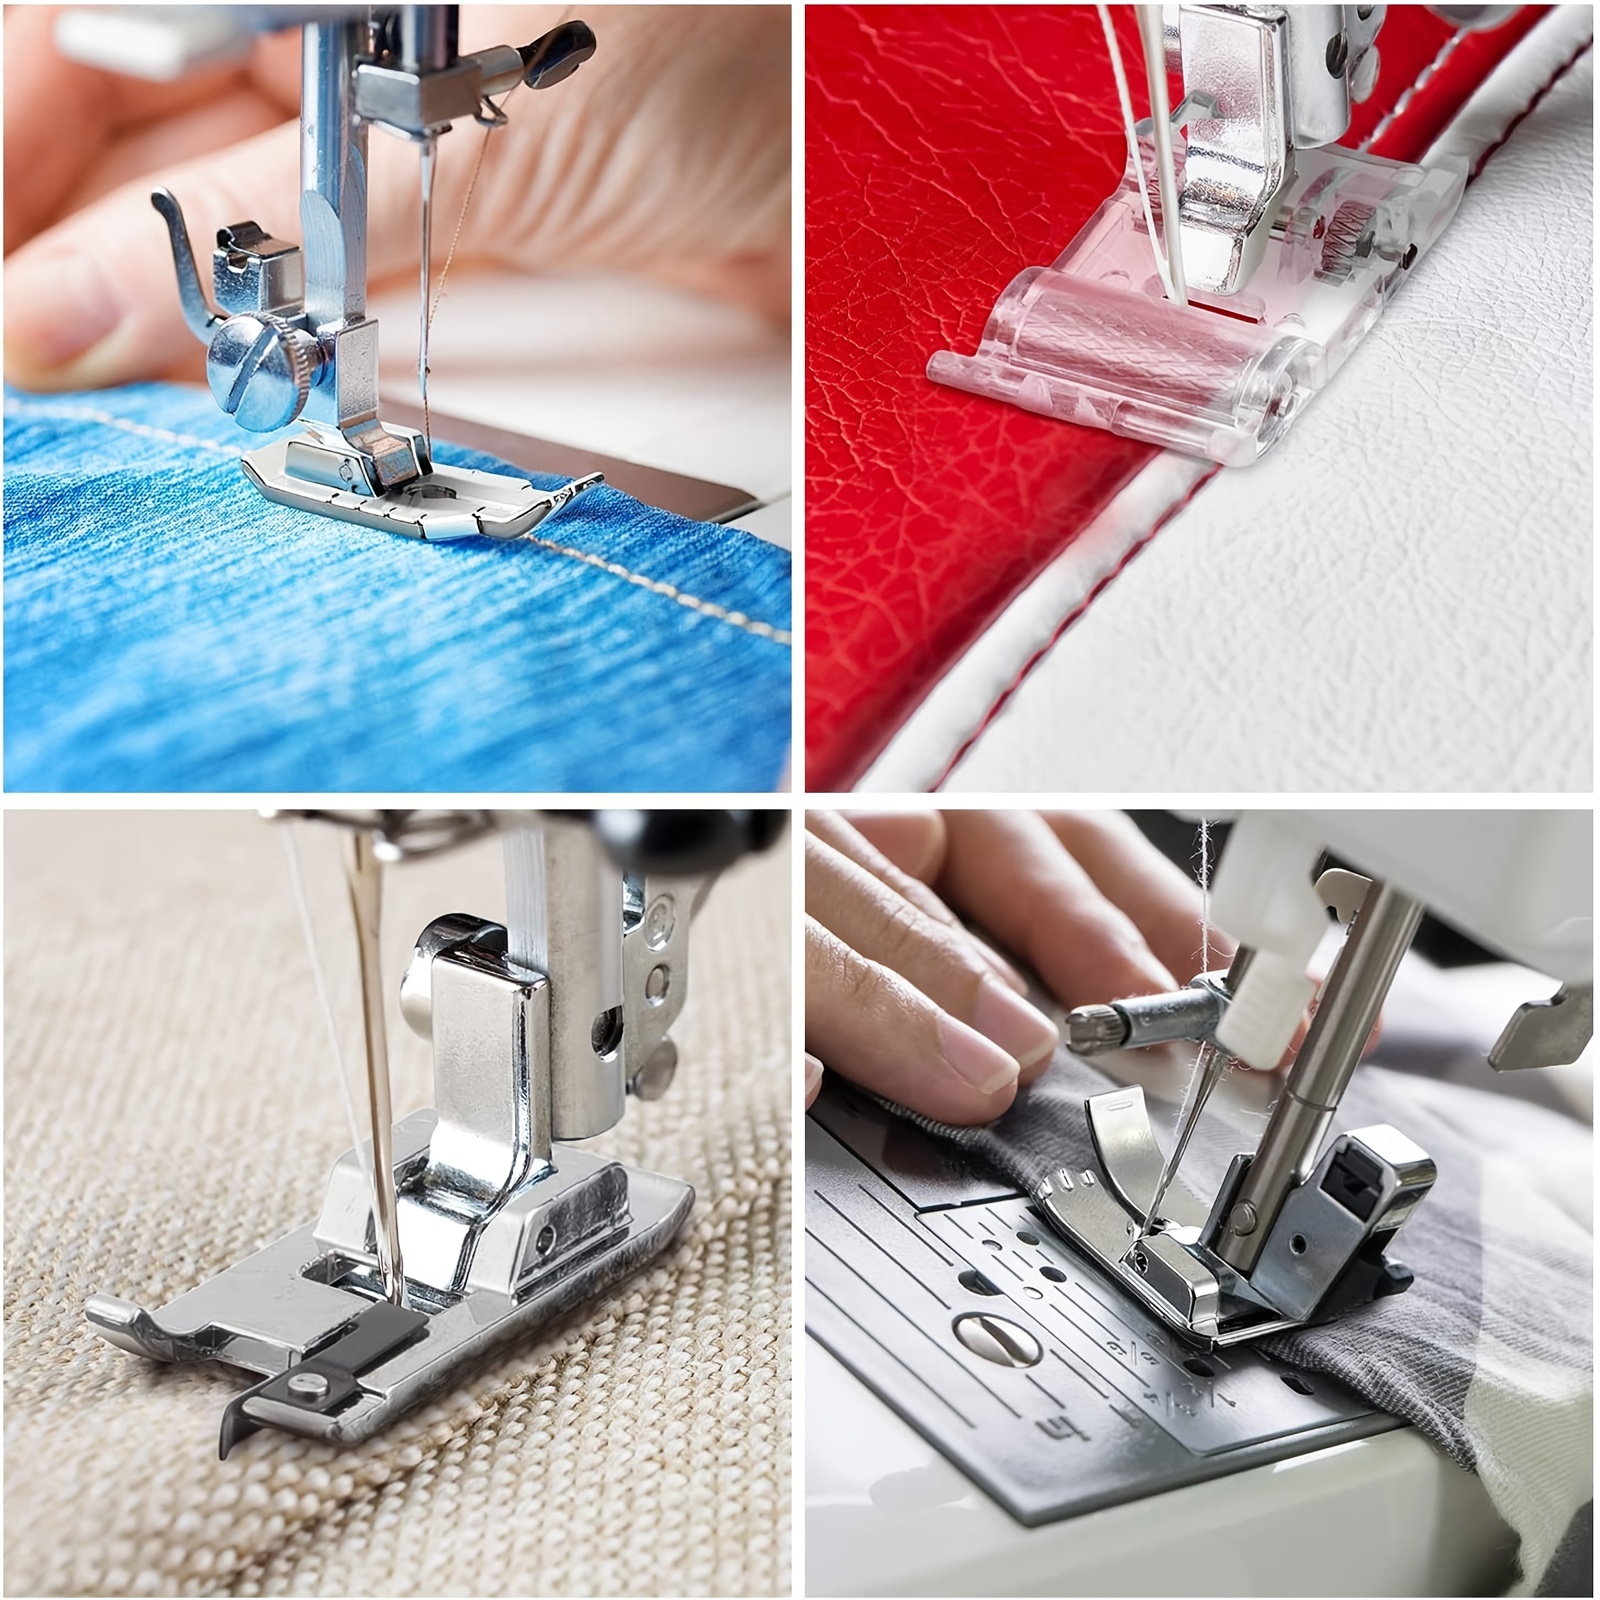 Kare & Kind 11x Sewing Machine Presser Feet Set - Fits Low Shank System -  Snap-on Installation for Sewing, Quilting, Embroidery, Zipper, Crafting-  for Brother, Singer, Janome, Kenmore, Babylock, Juki : 